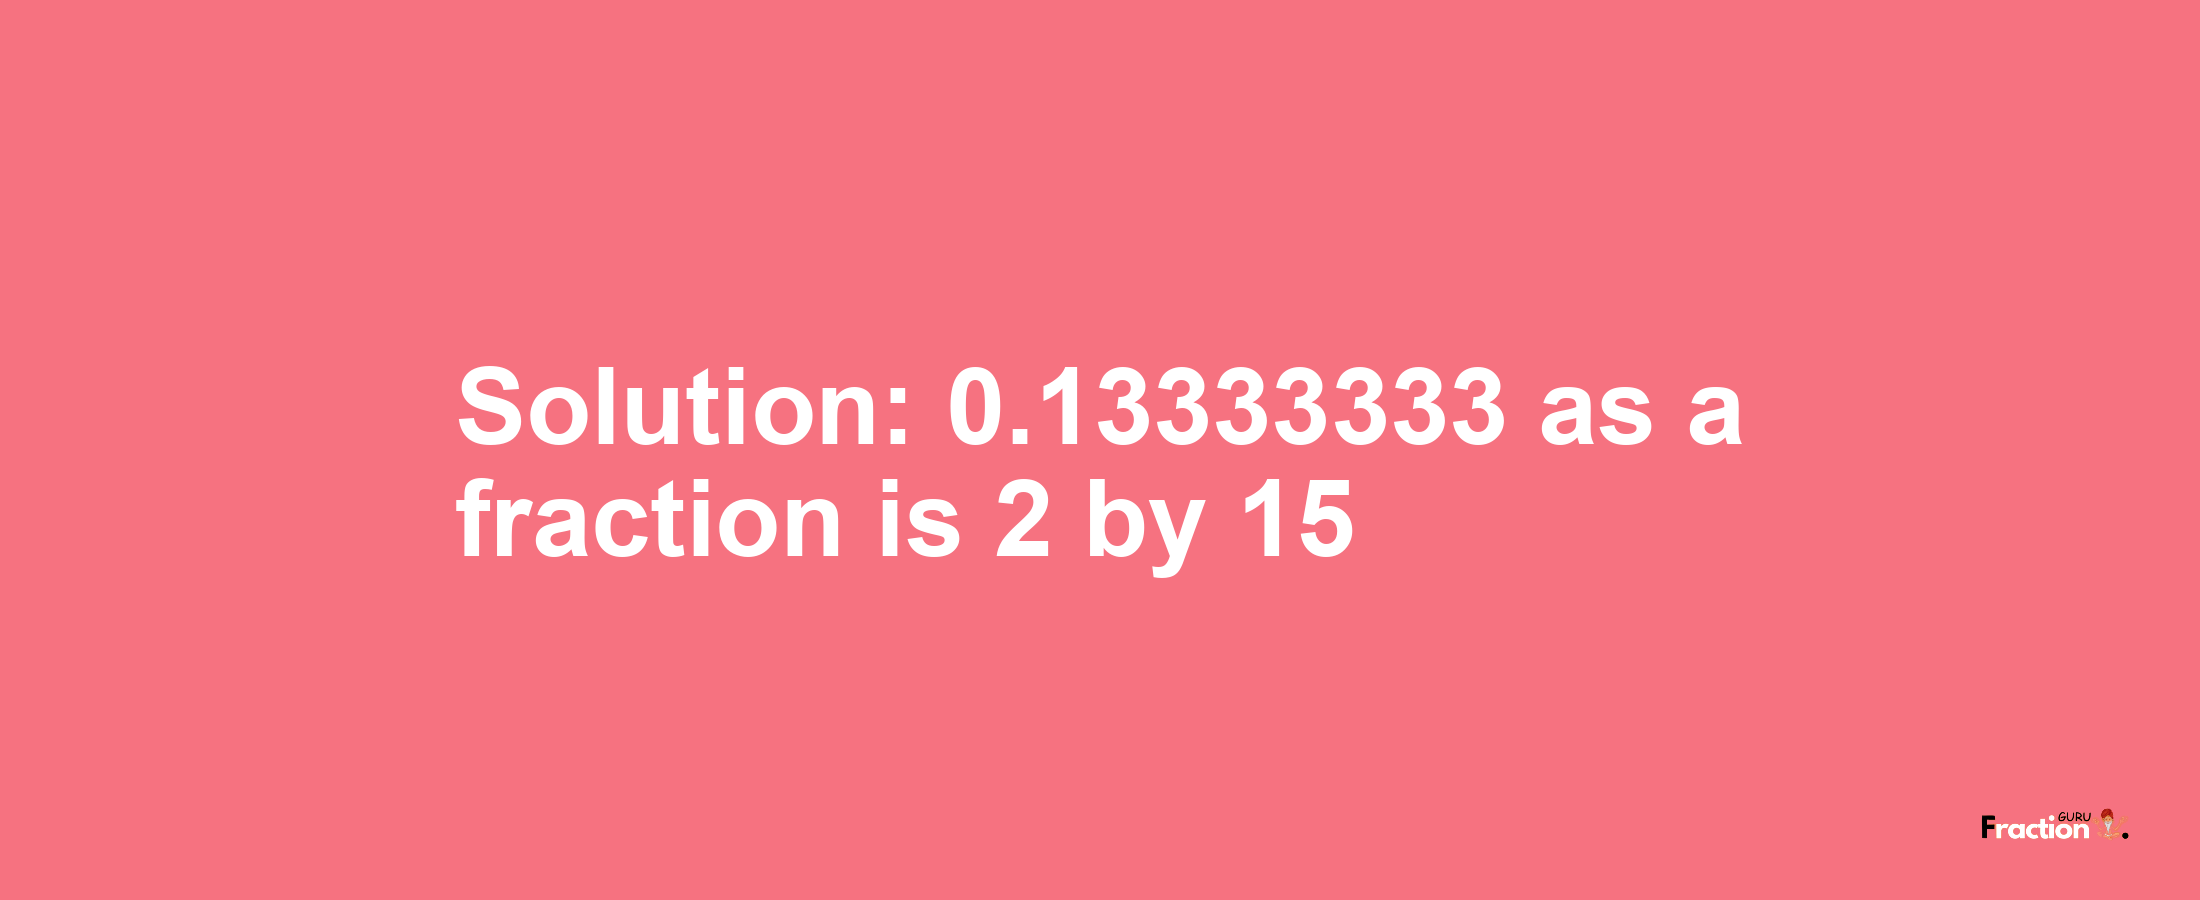 Solution:0.13333333 as a fraction is 2/15